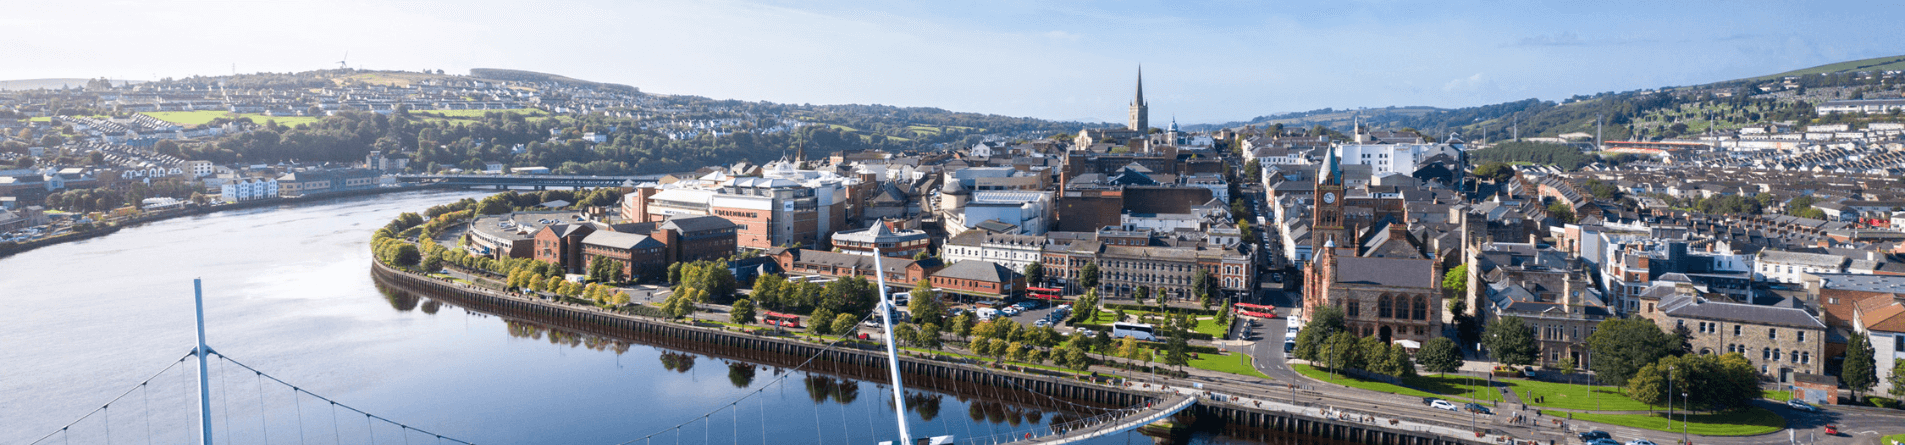 An aerial view of derry city 